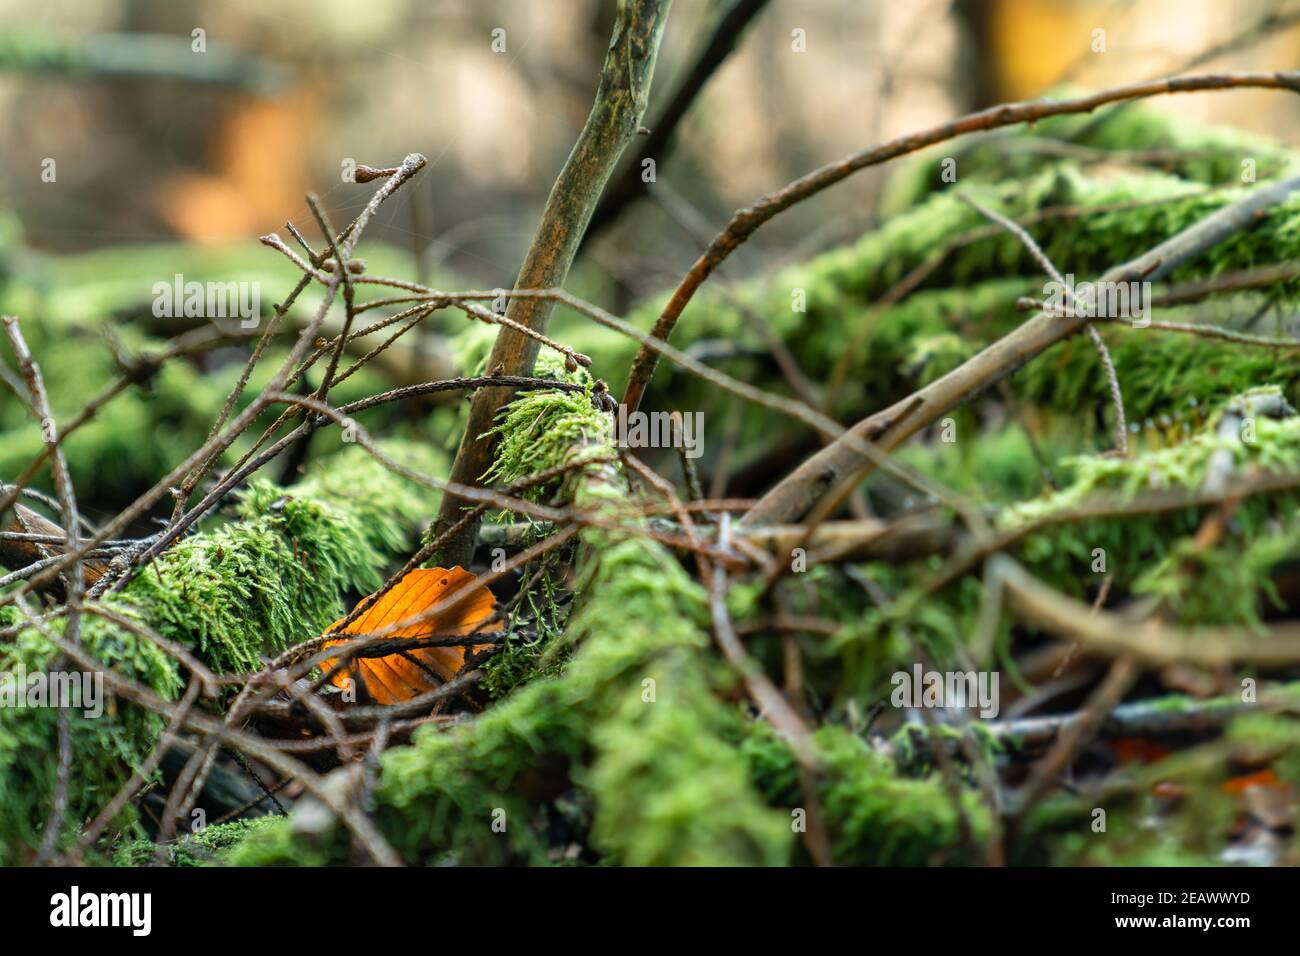 Leaf between Moss-covered Branches in Autumn Forest Stock Photo